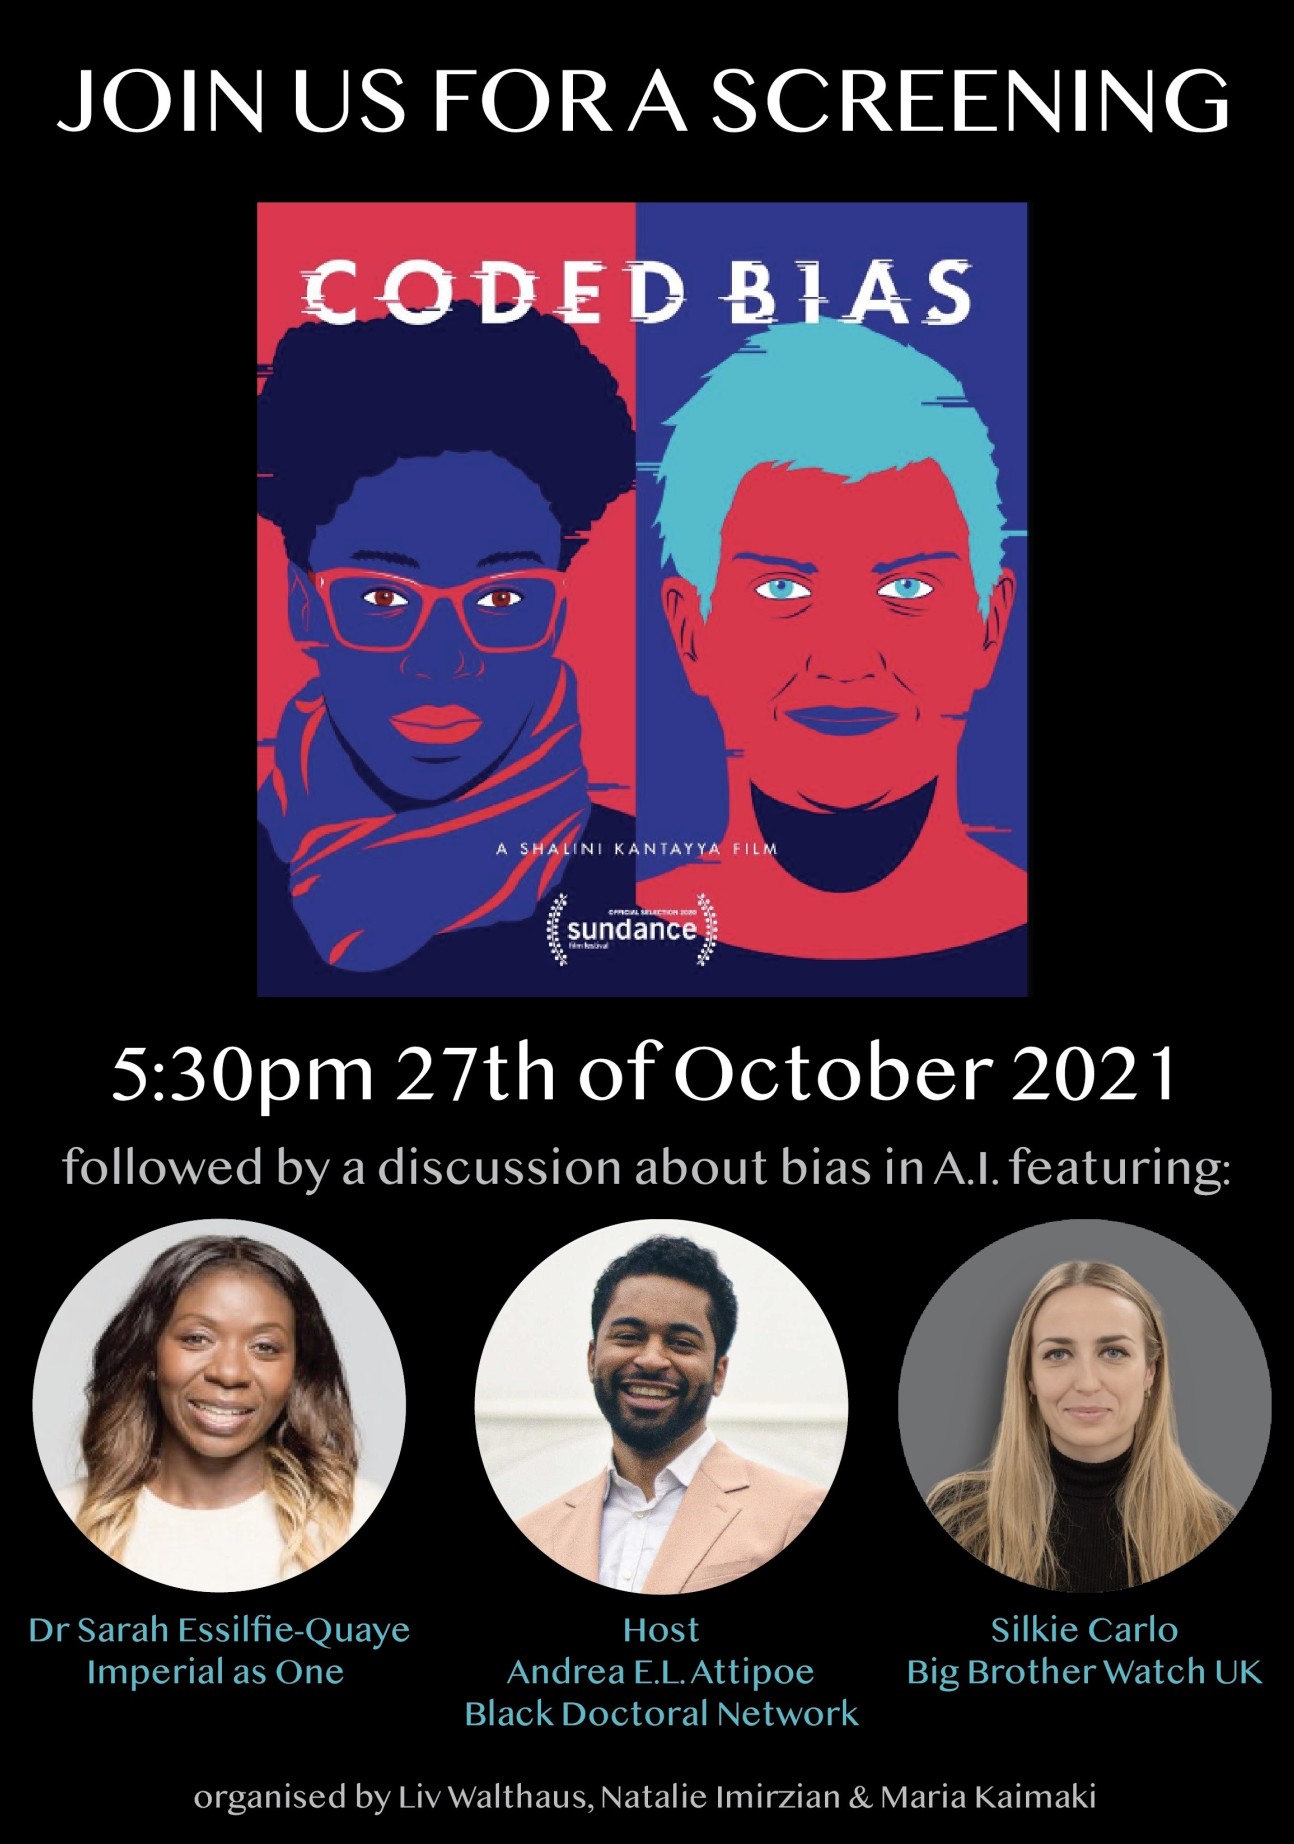 Coded bias poster